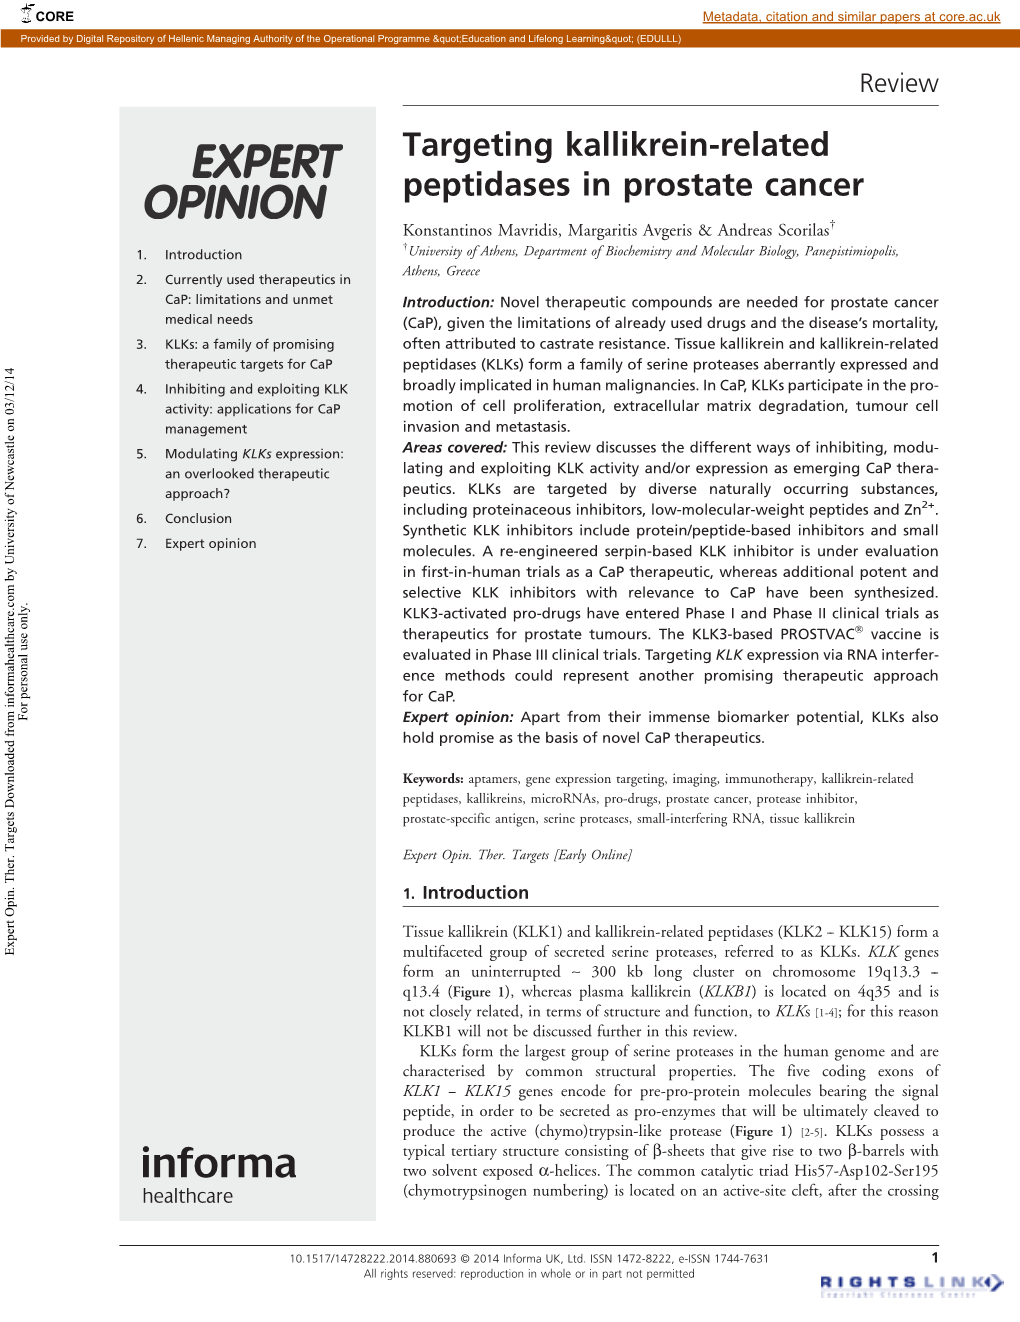 Targeting Kallikrein-Related Peptidases in Prostate Cancer